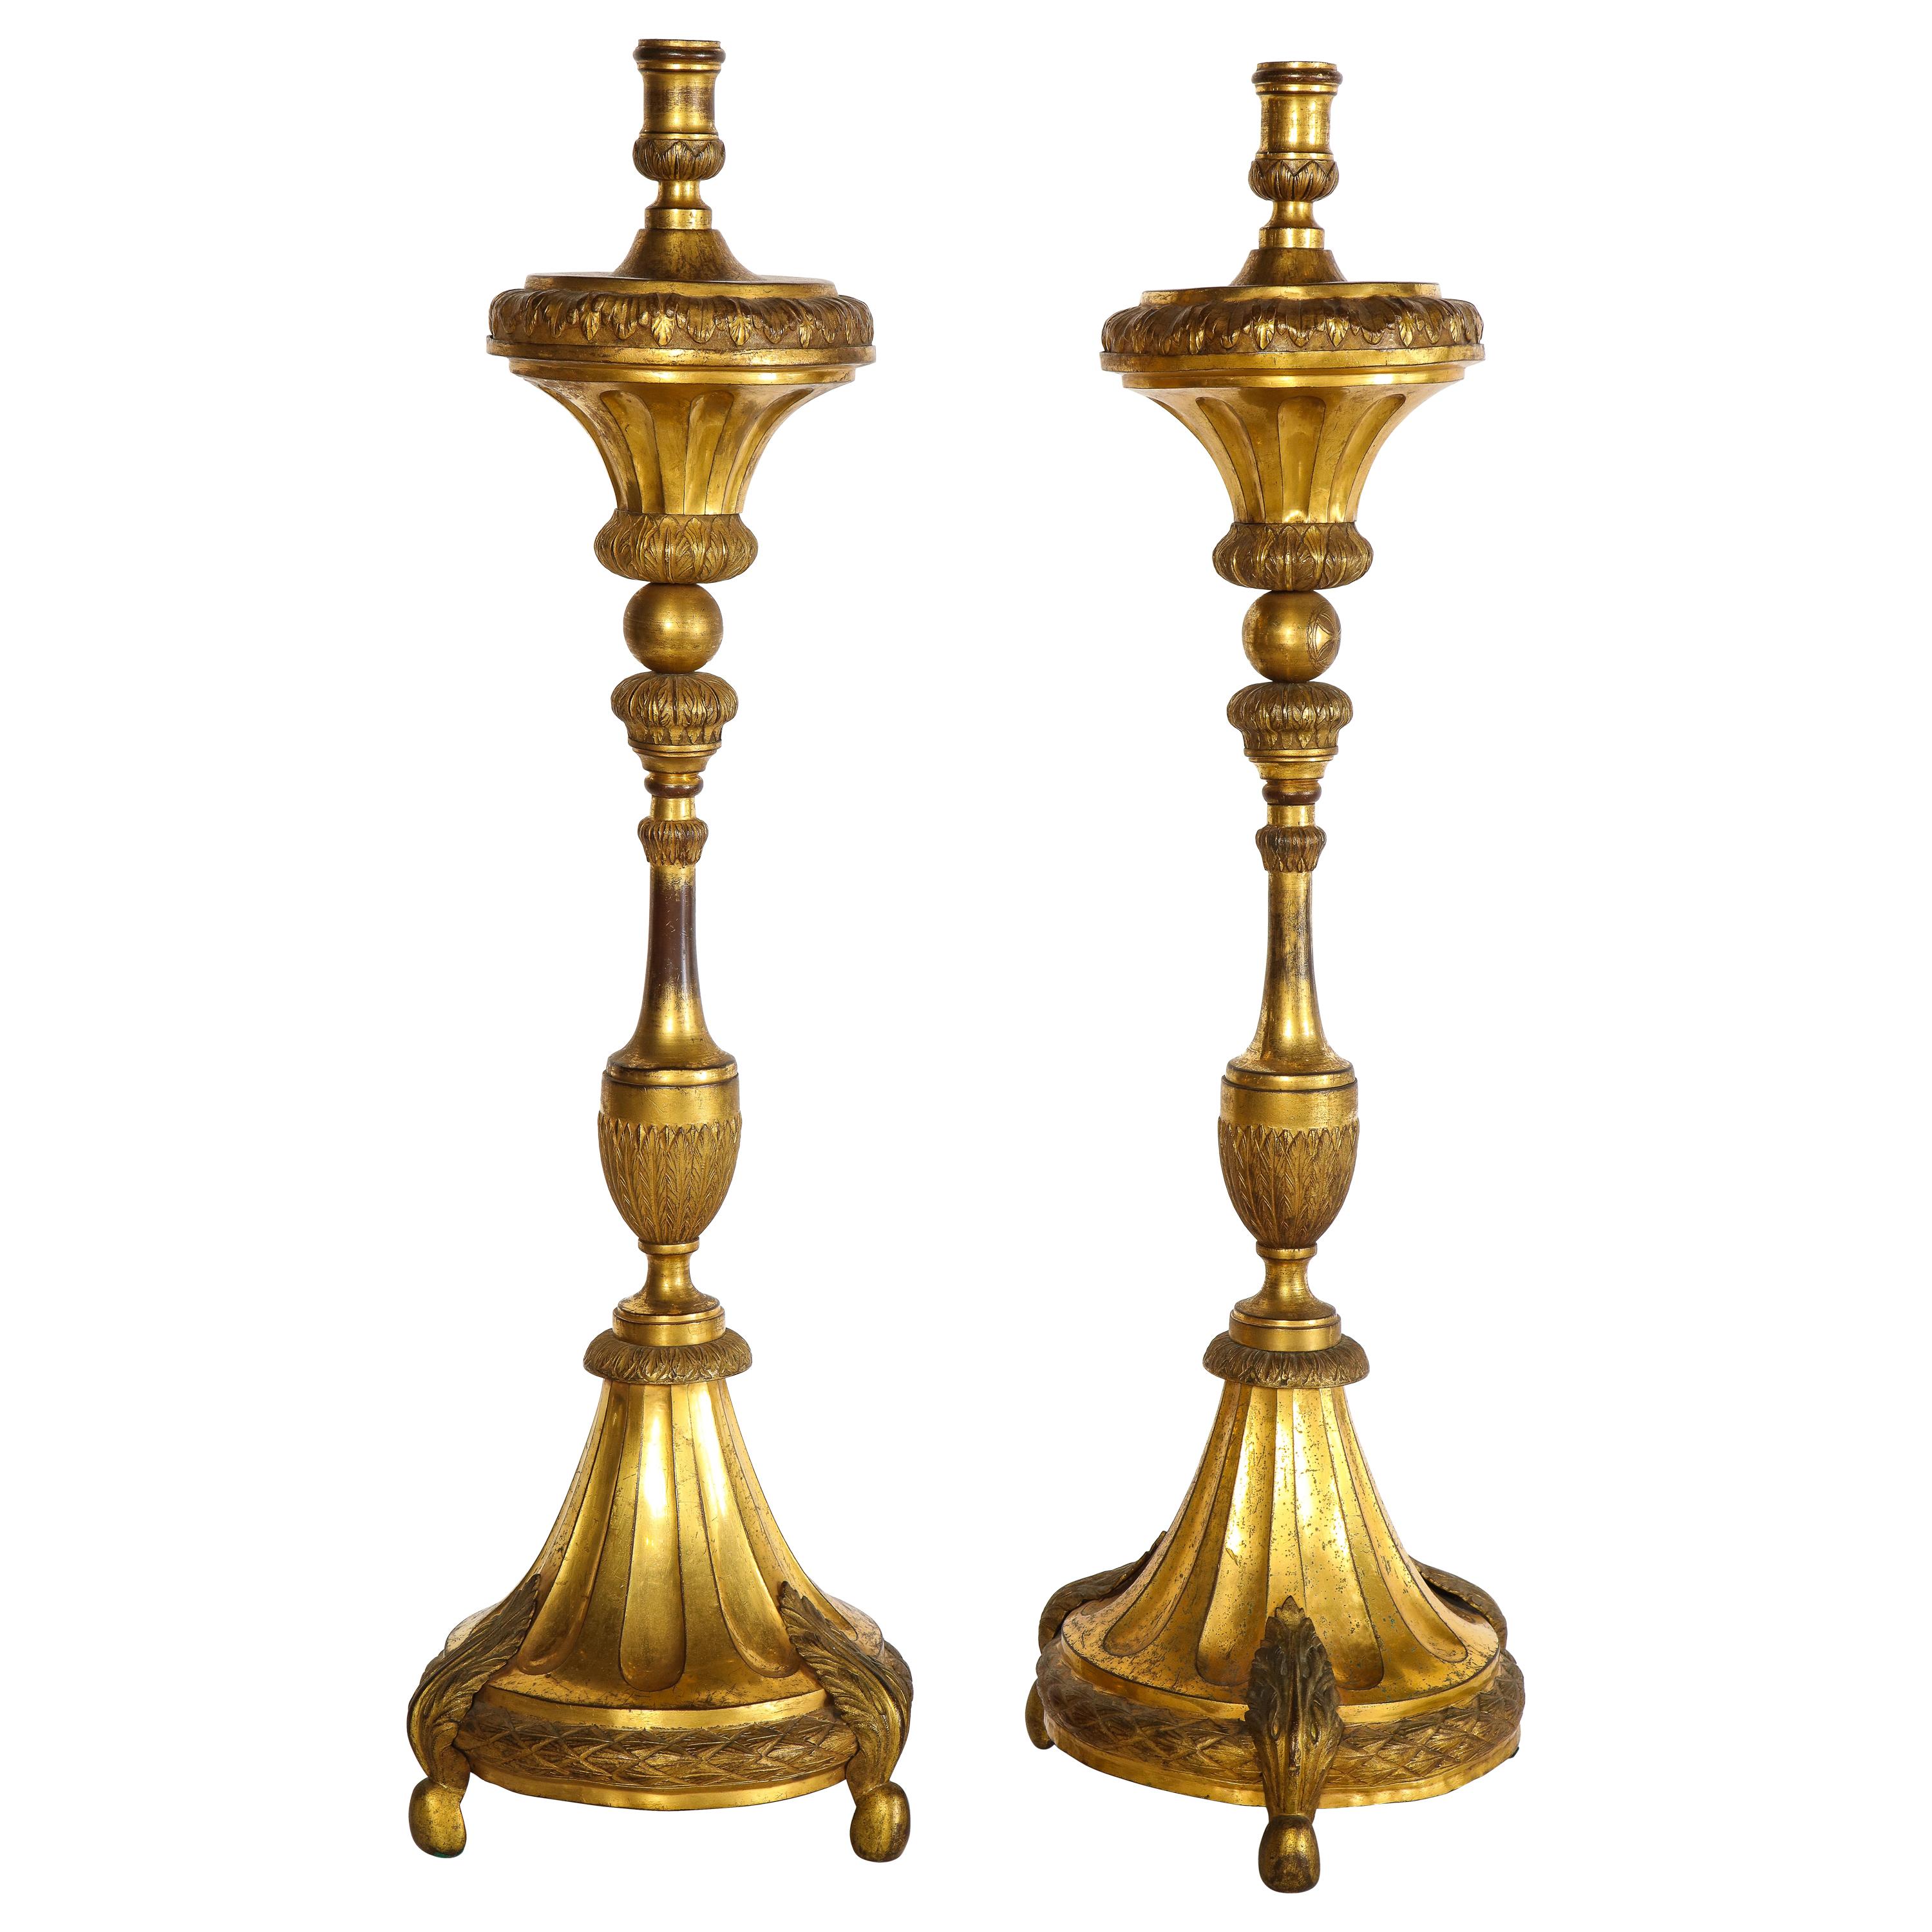 Large Pair of South American/Mexican Dore Bronze 18th Century Candleholders